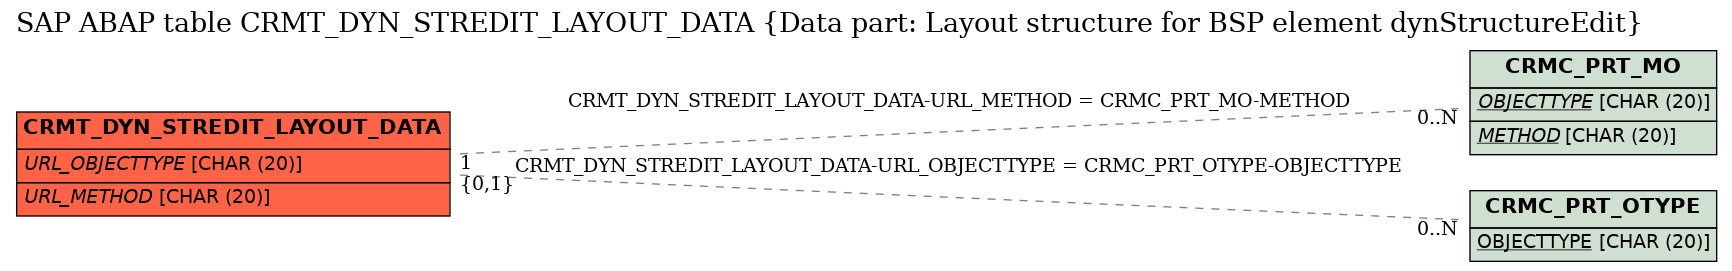 E-R Diagram for table CRMT_DYN_STREDIT_LAYOUT_DATA (Data part: Layout structure for BSP element dynStructureEdit)